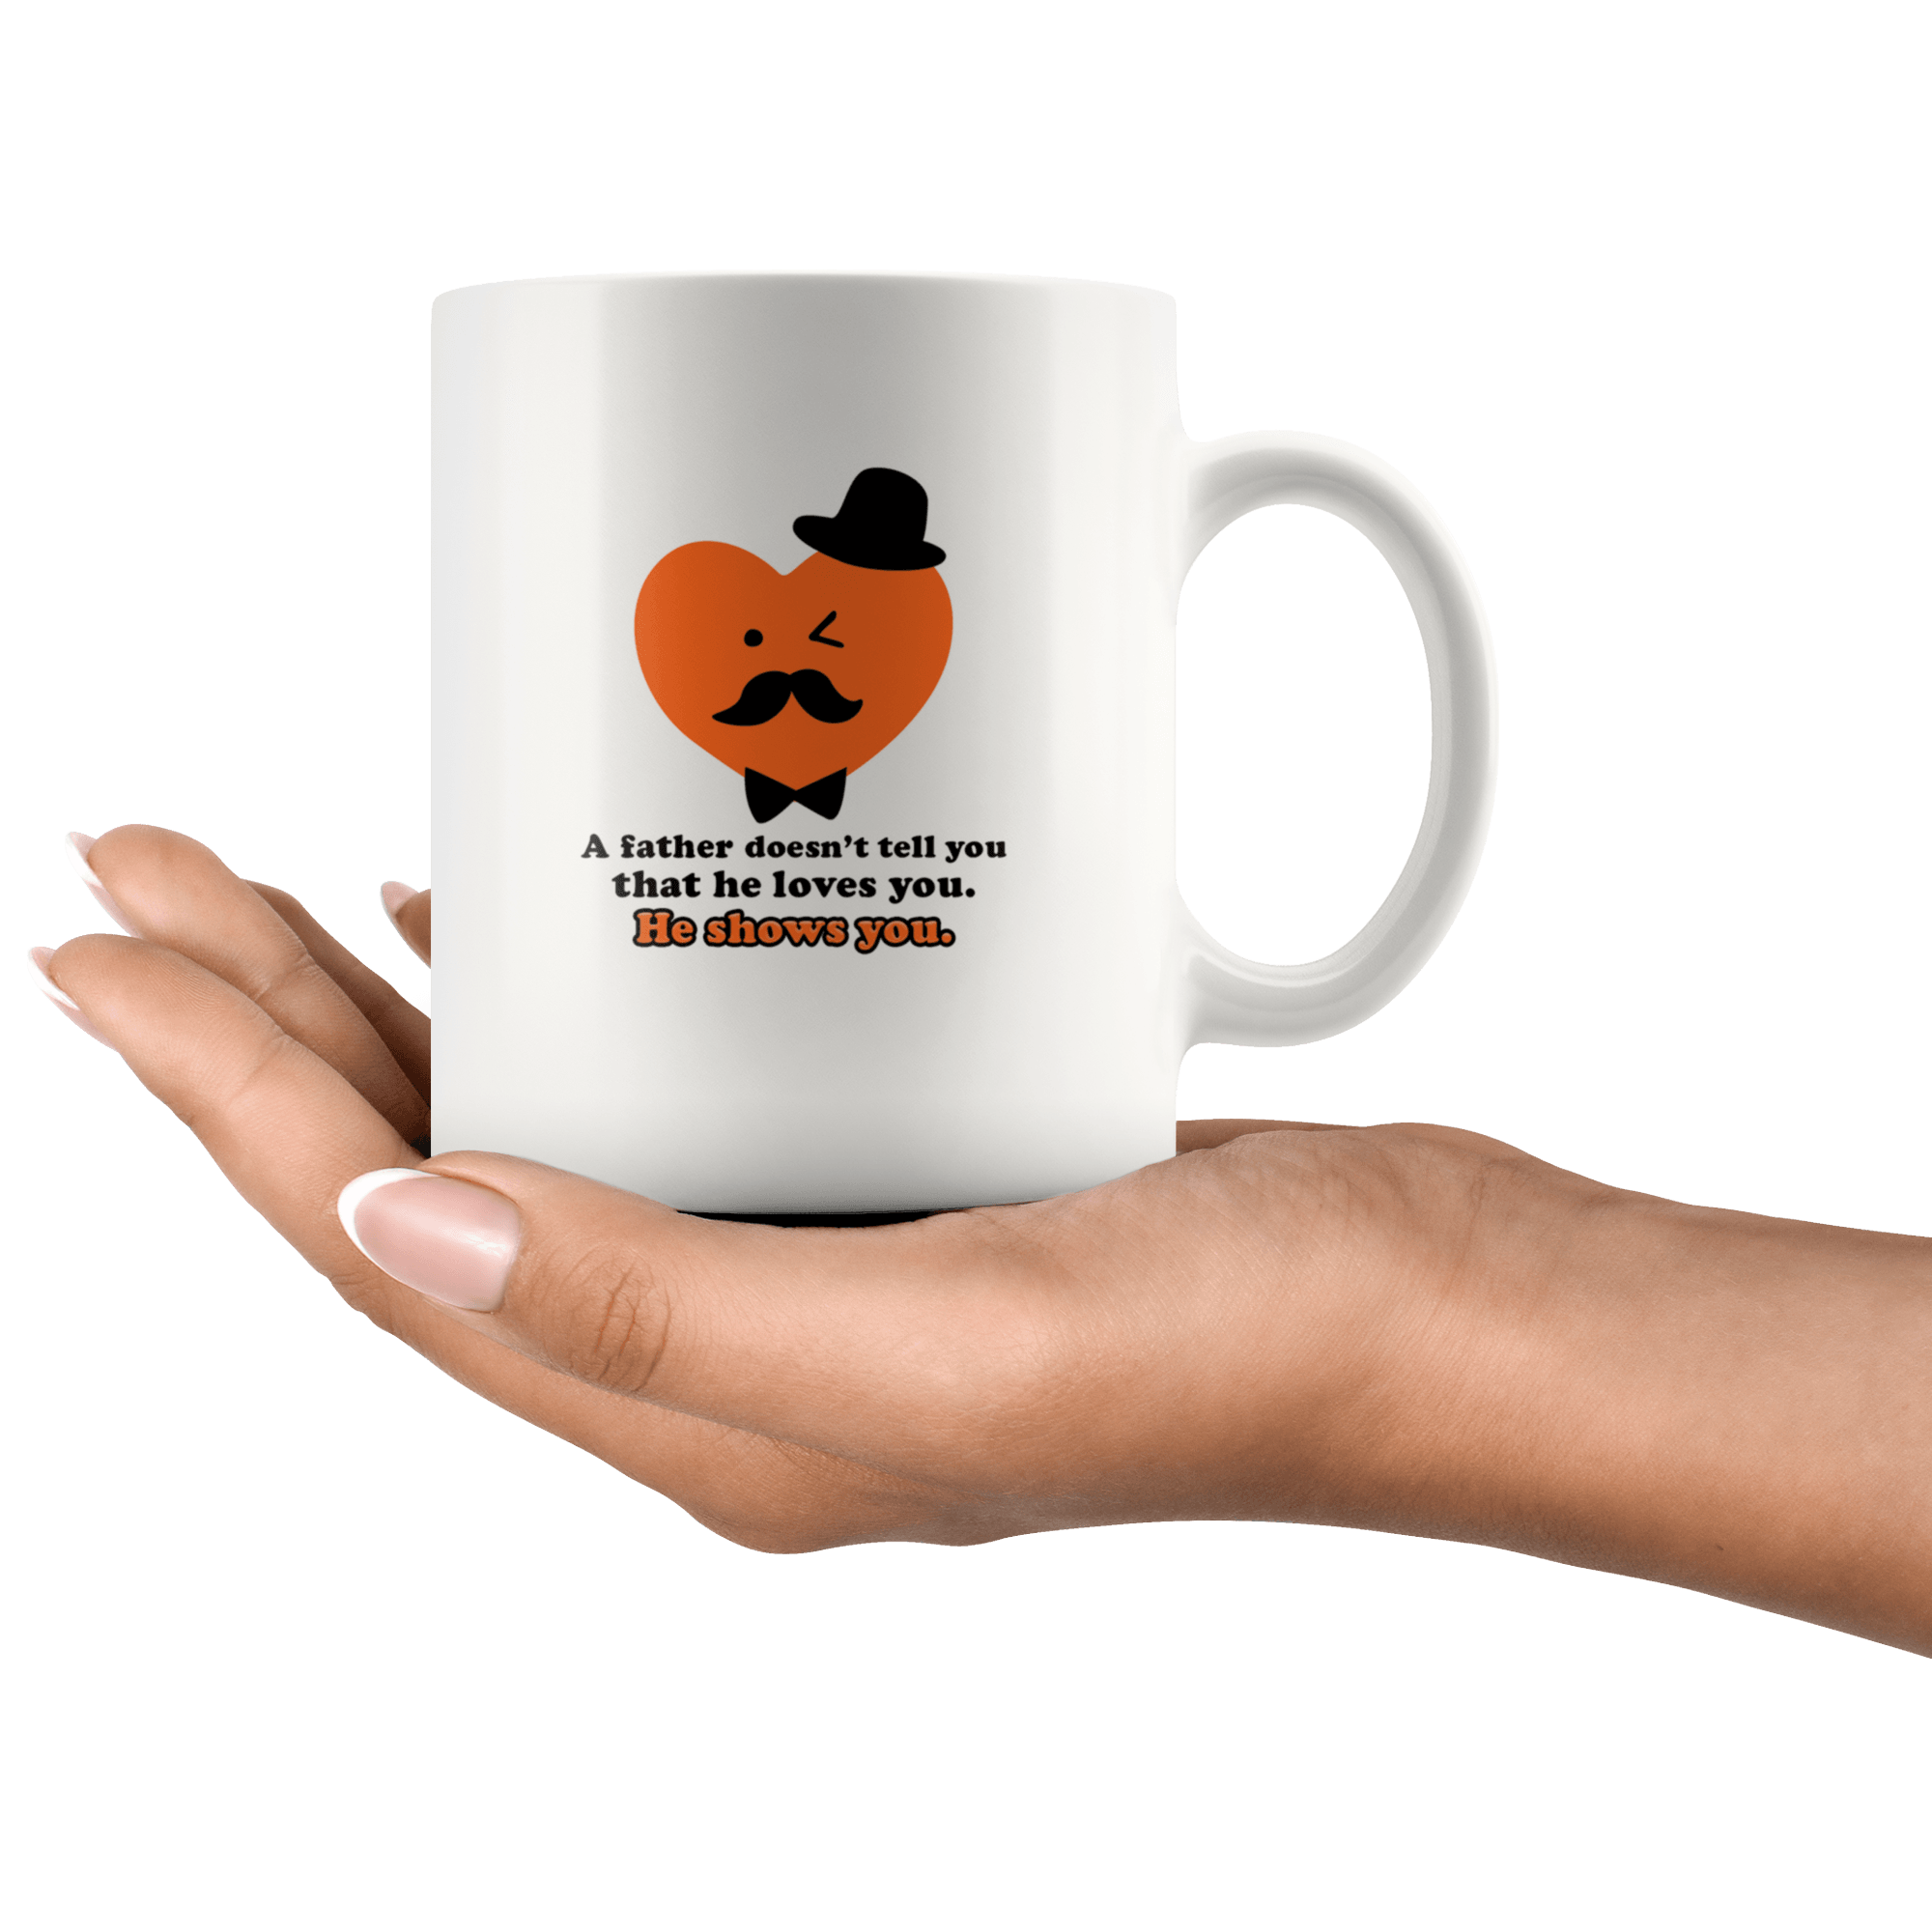 Great Coffee Mug For Father - Suitable For Father's Day, Birthday or Any Occasion From Son or Daughter. - SPCM